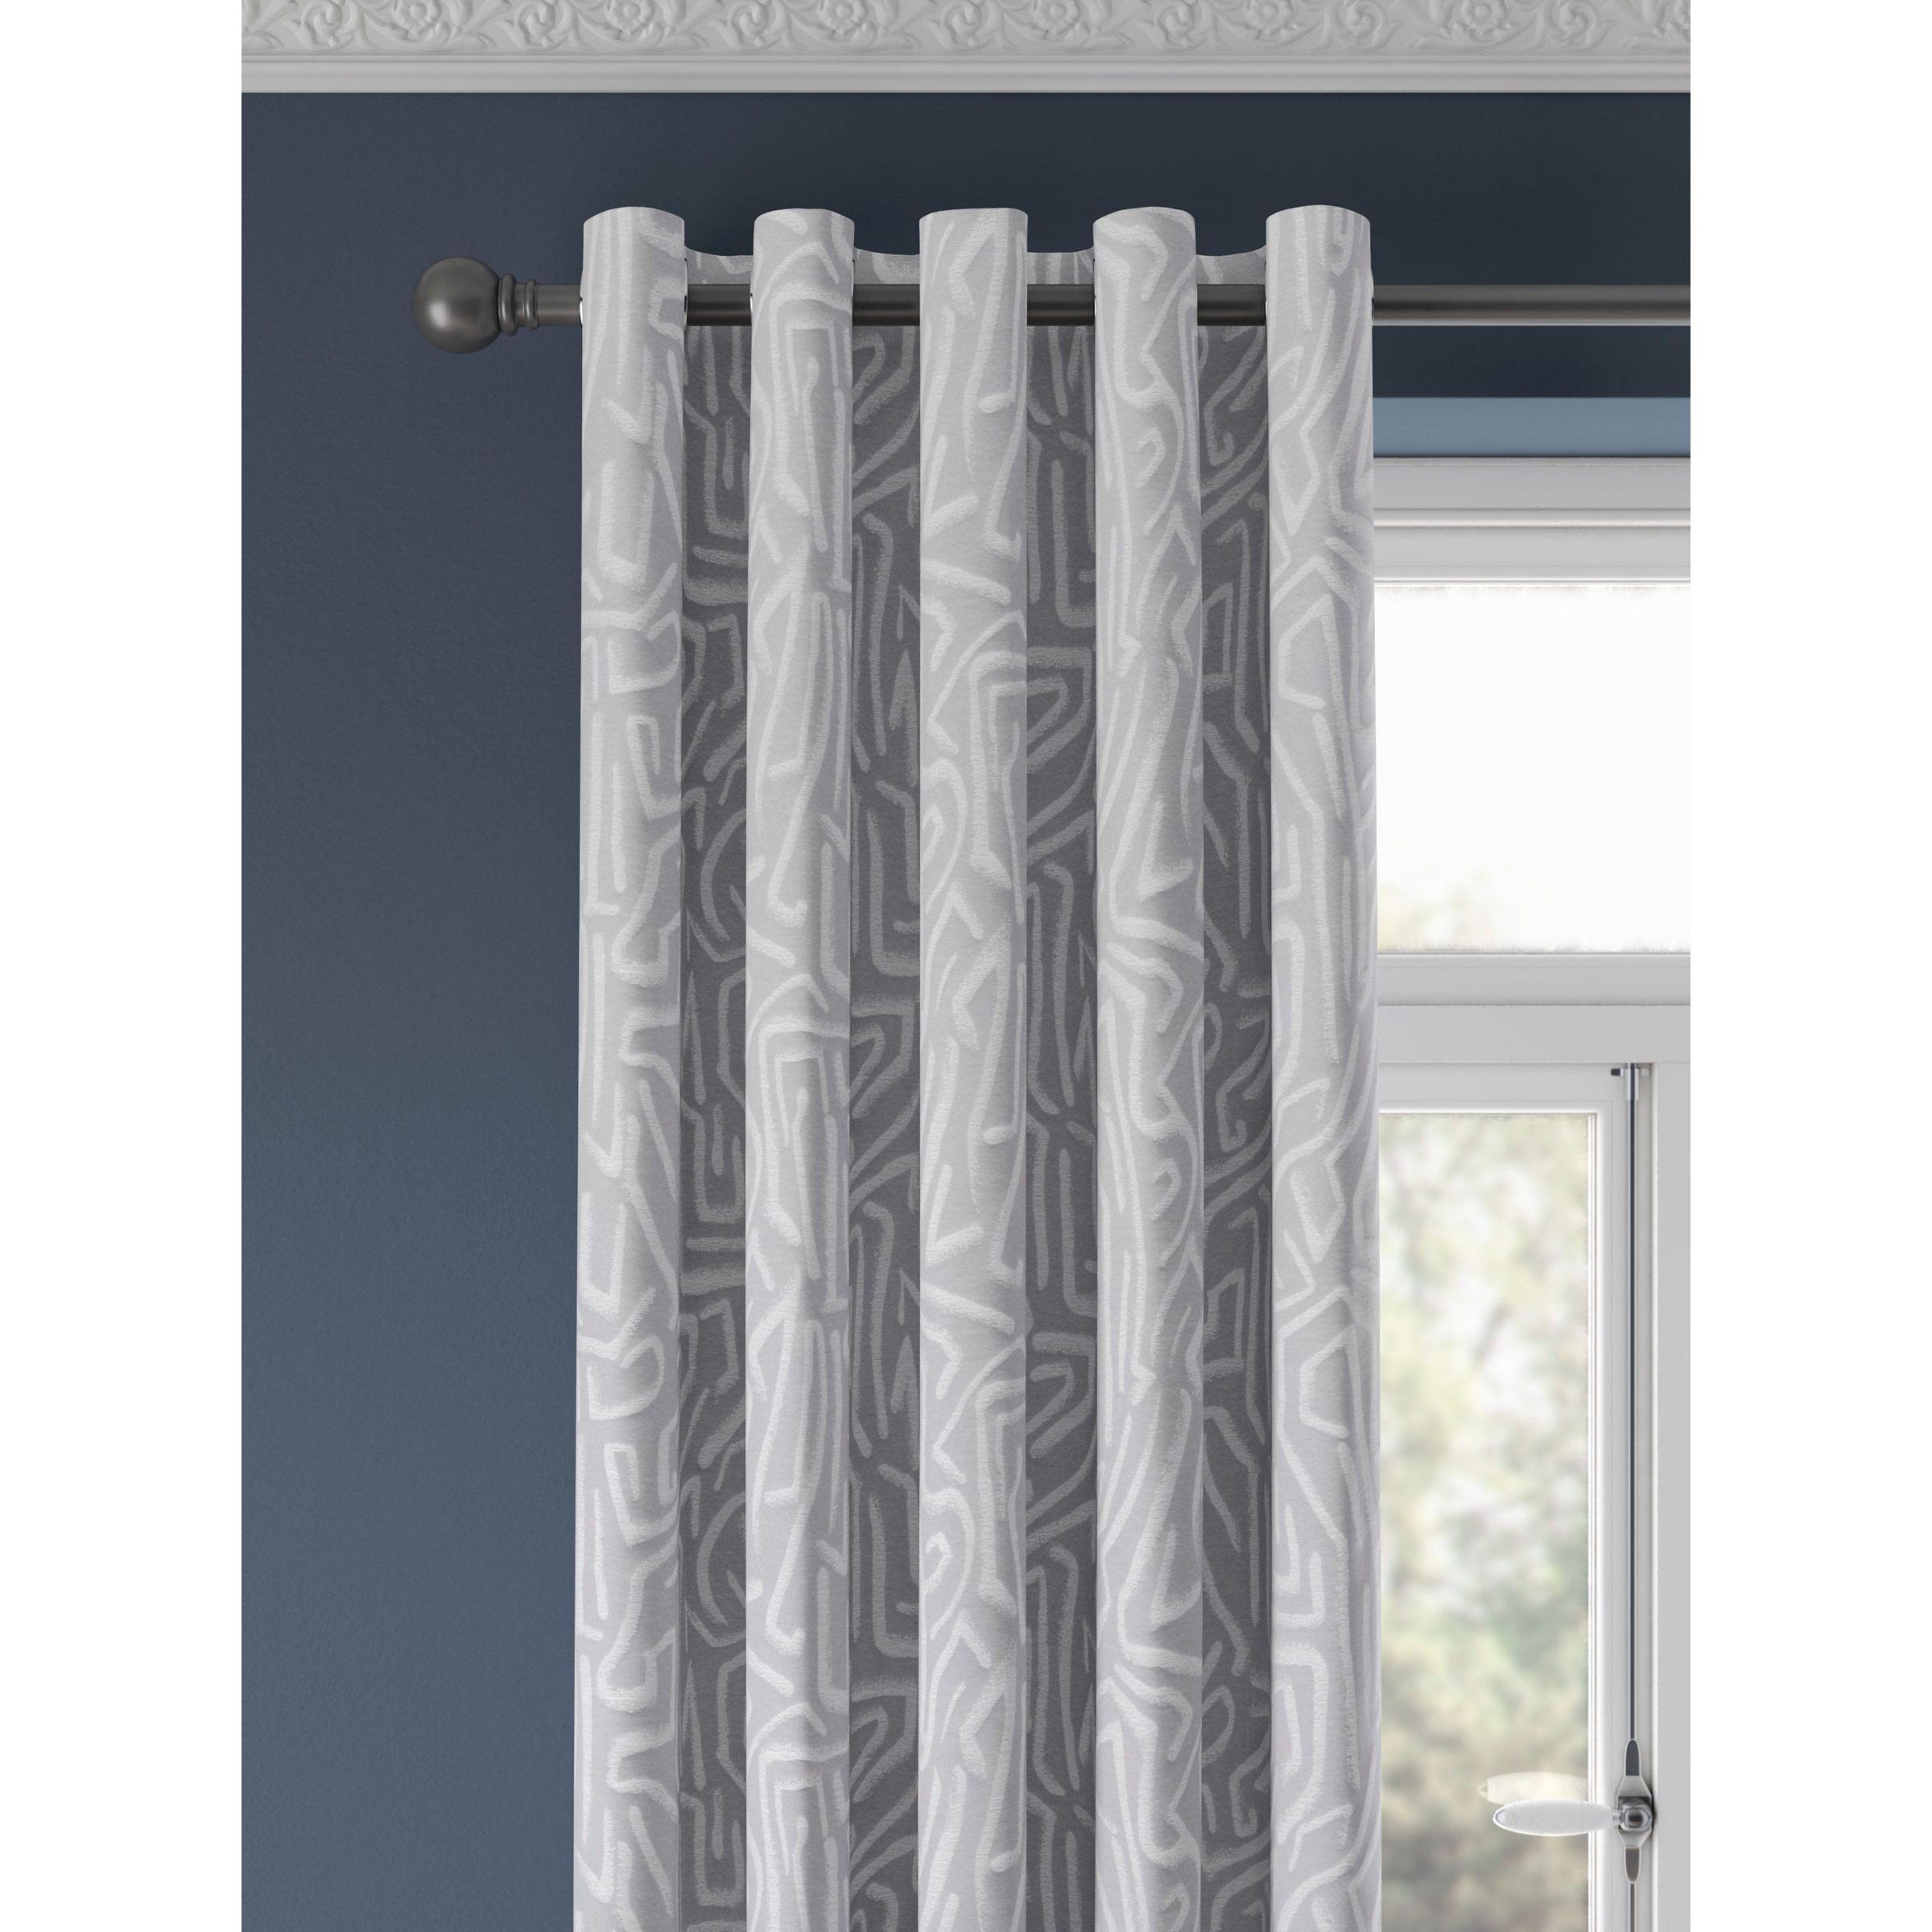 Harlequin Melodic Pair Lined Eyelet Curtains - image 1